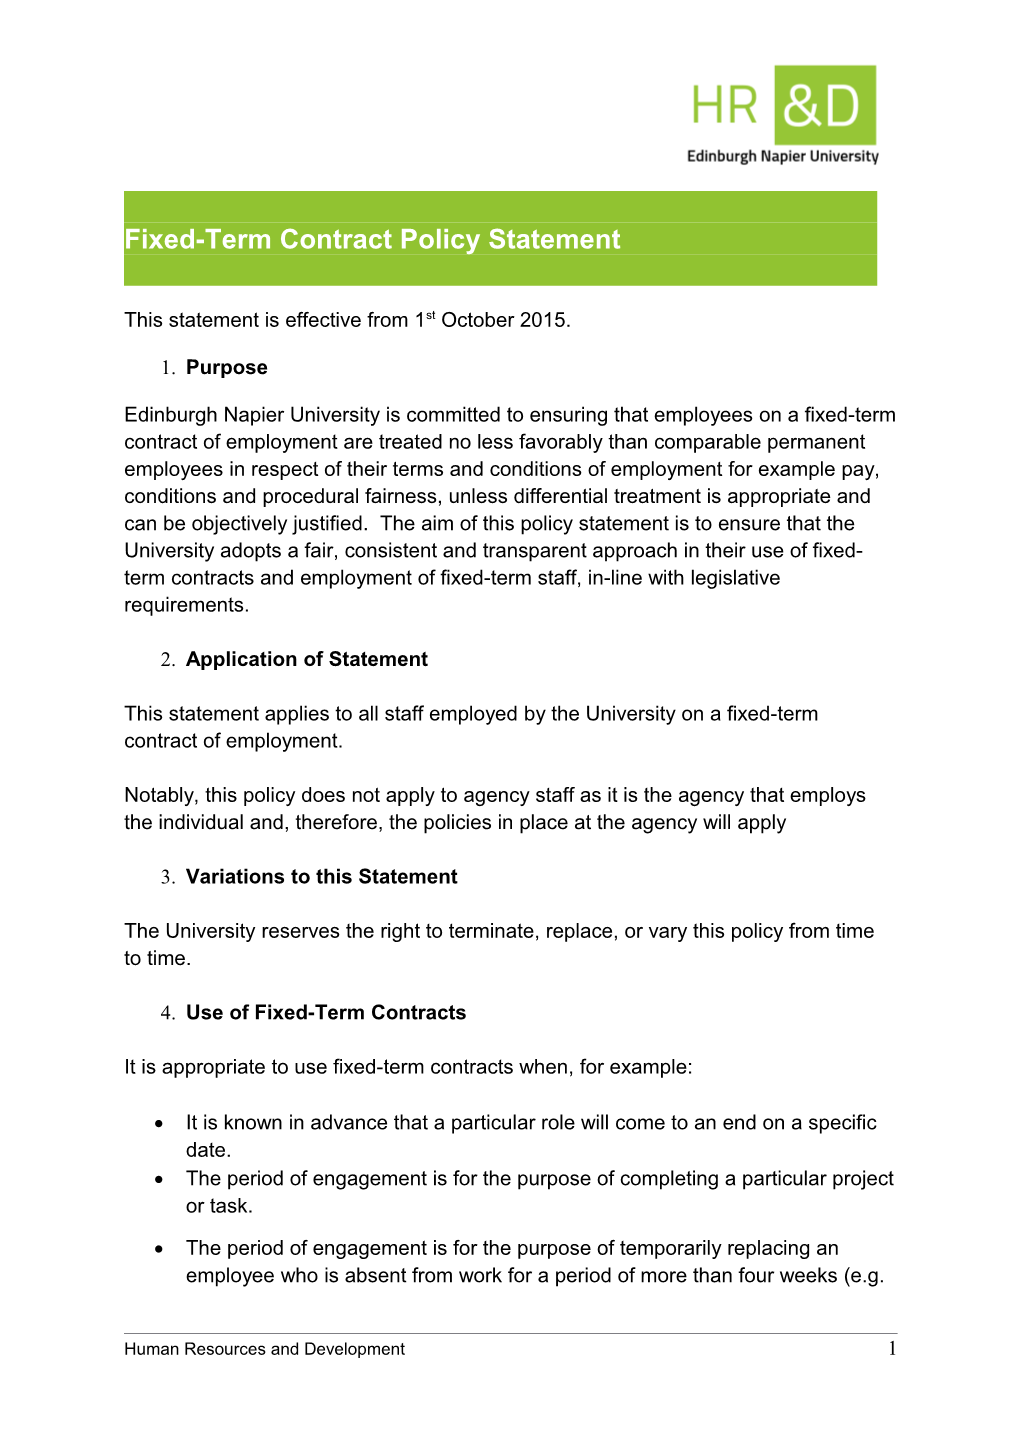 Fixed-Term Contract Policy Statement